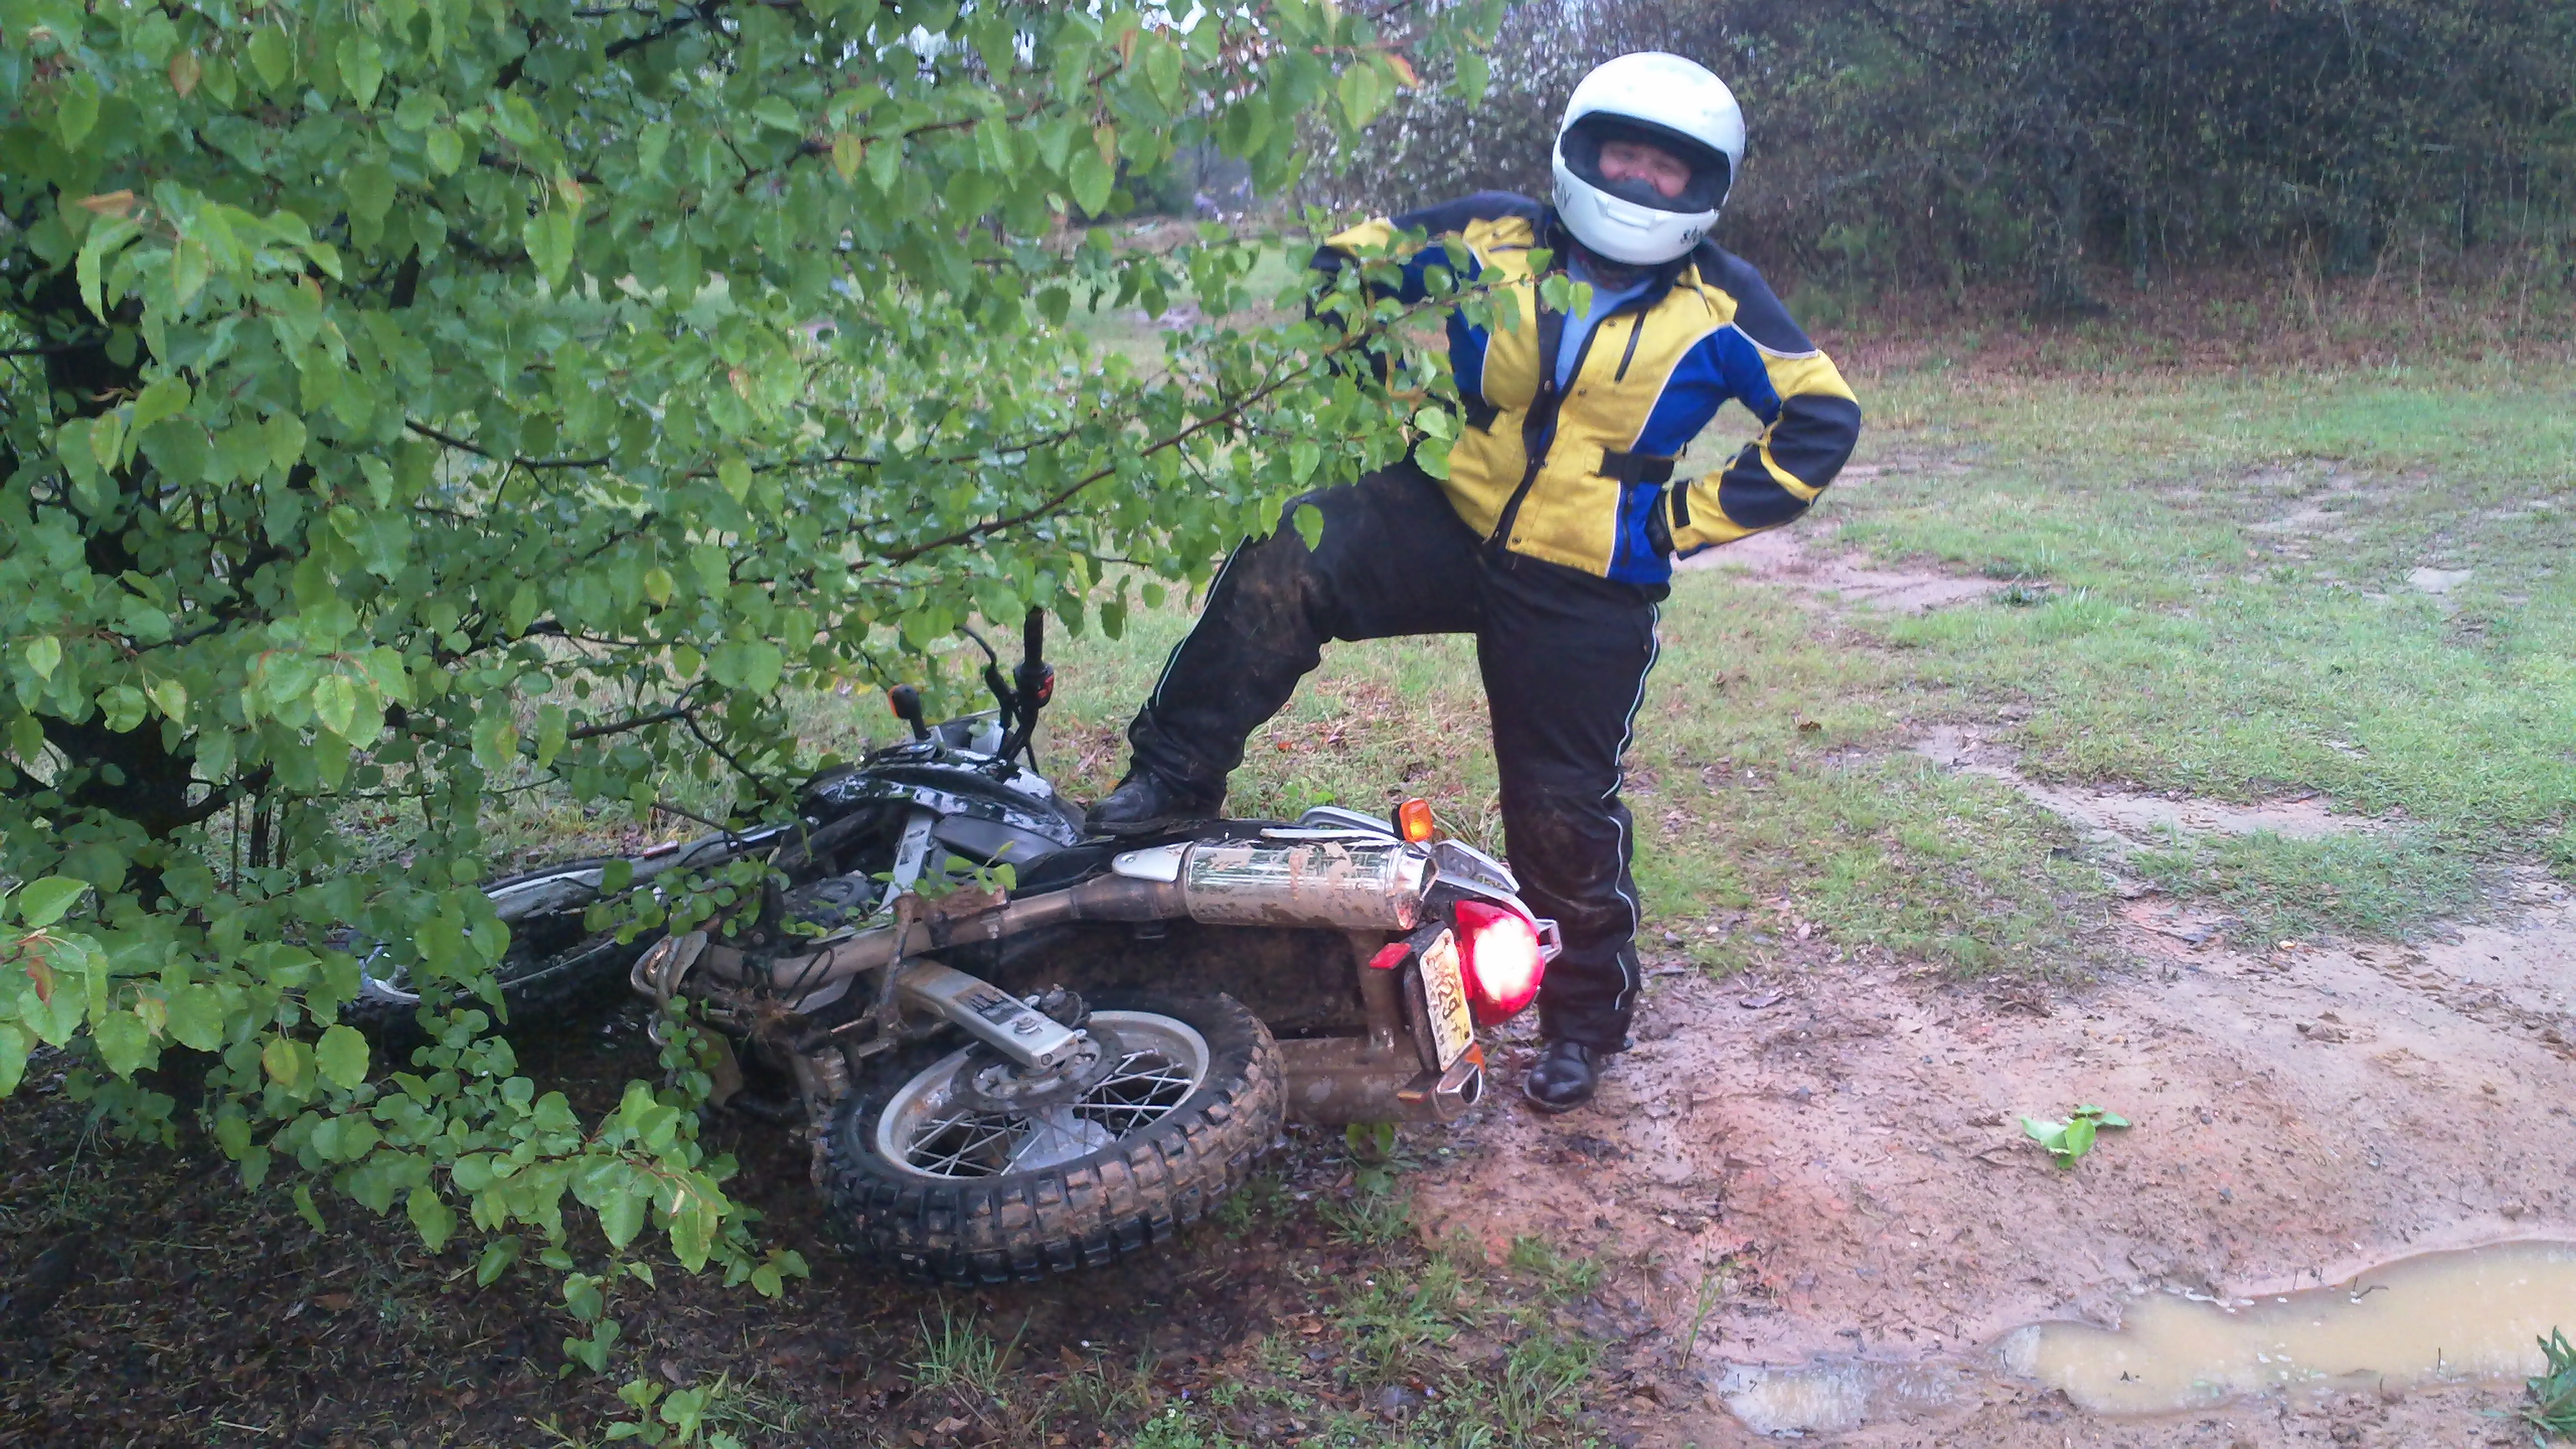 Picture of me after a muddy crash